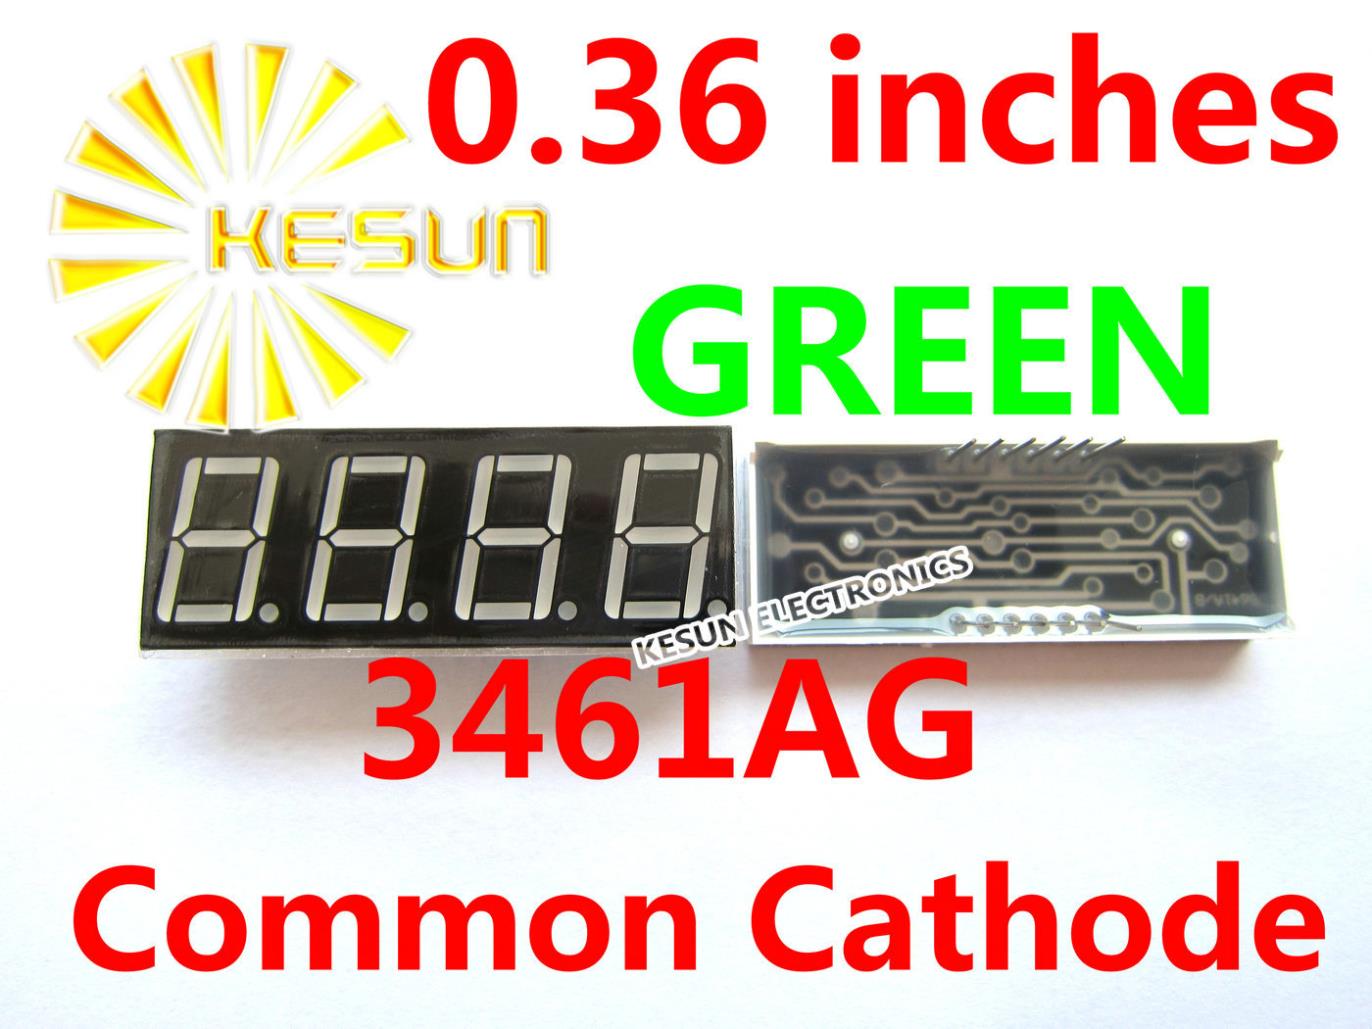 5PCS x 0.36 inches Green Red Common Cathode/Anode 4 Digital Tube 3461AG 3461BG 3461AS 3461BS LED Display Module